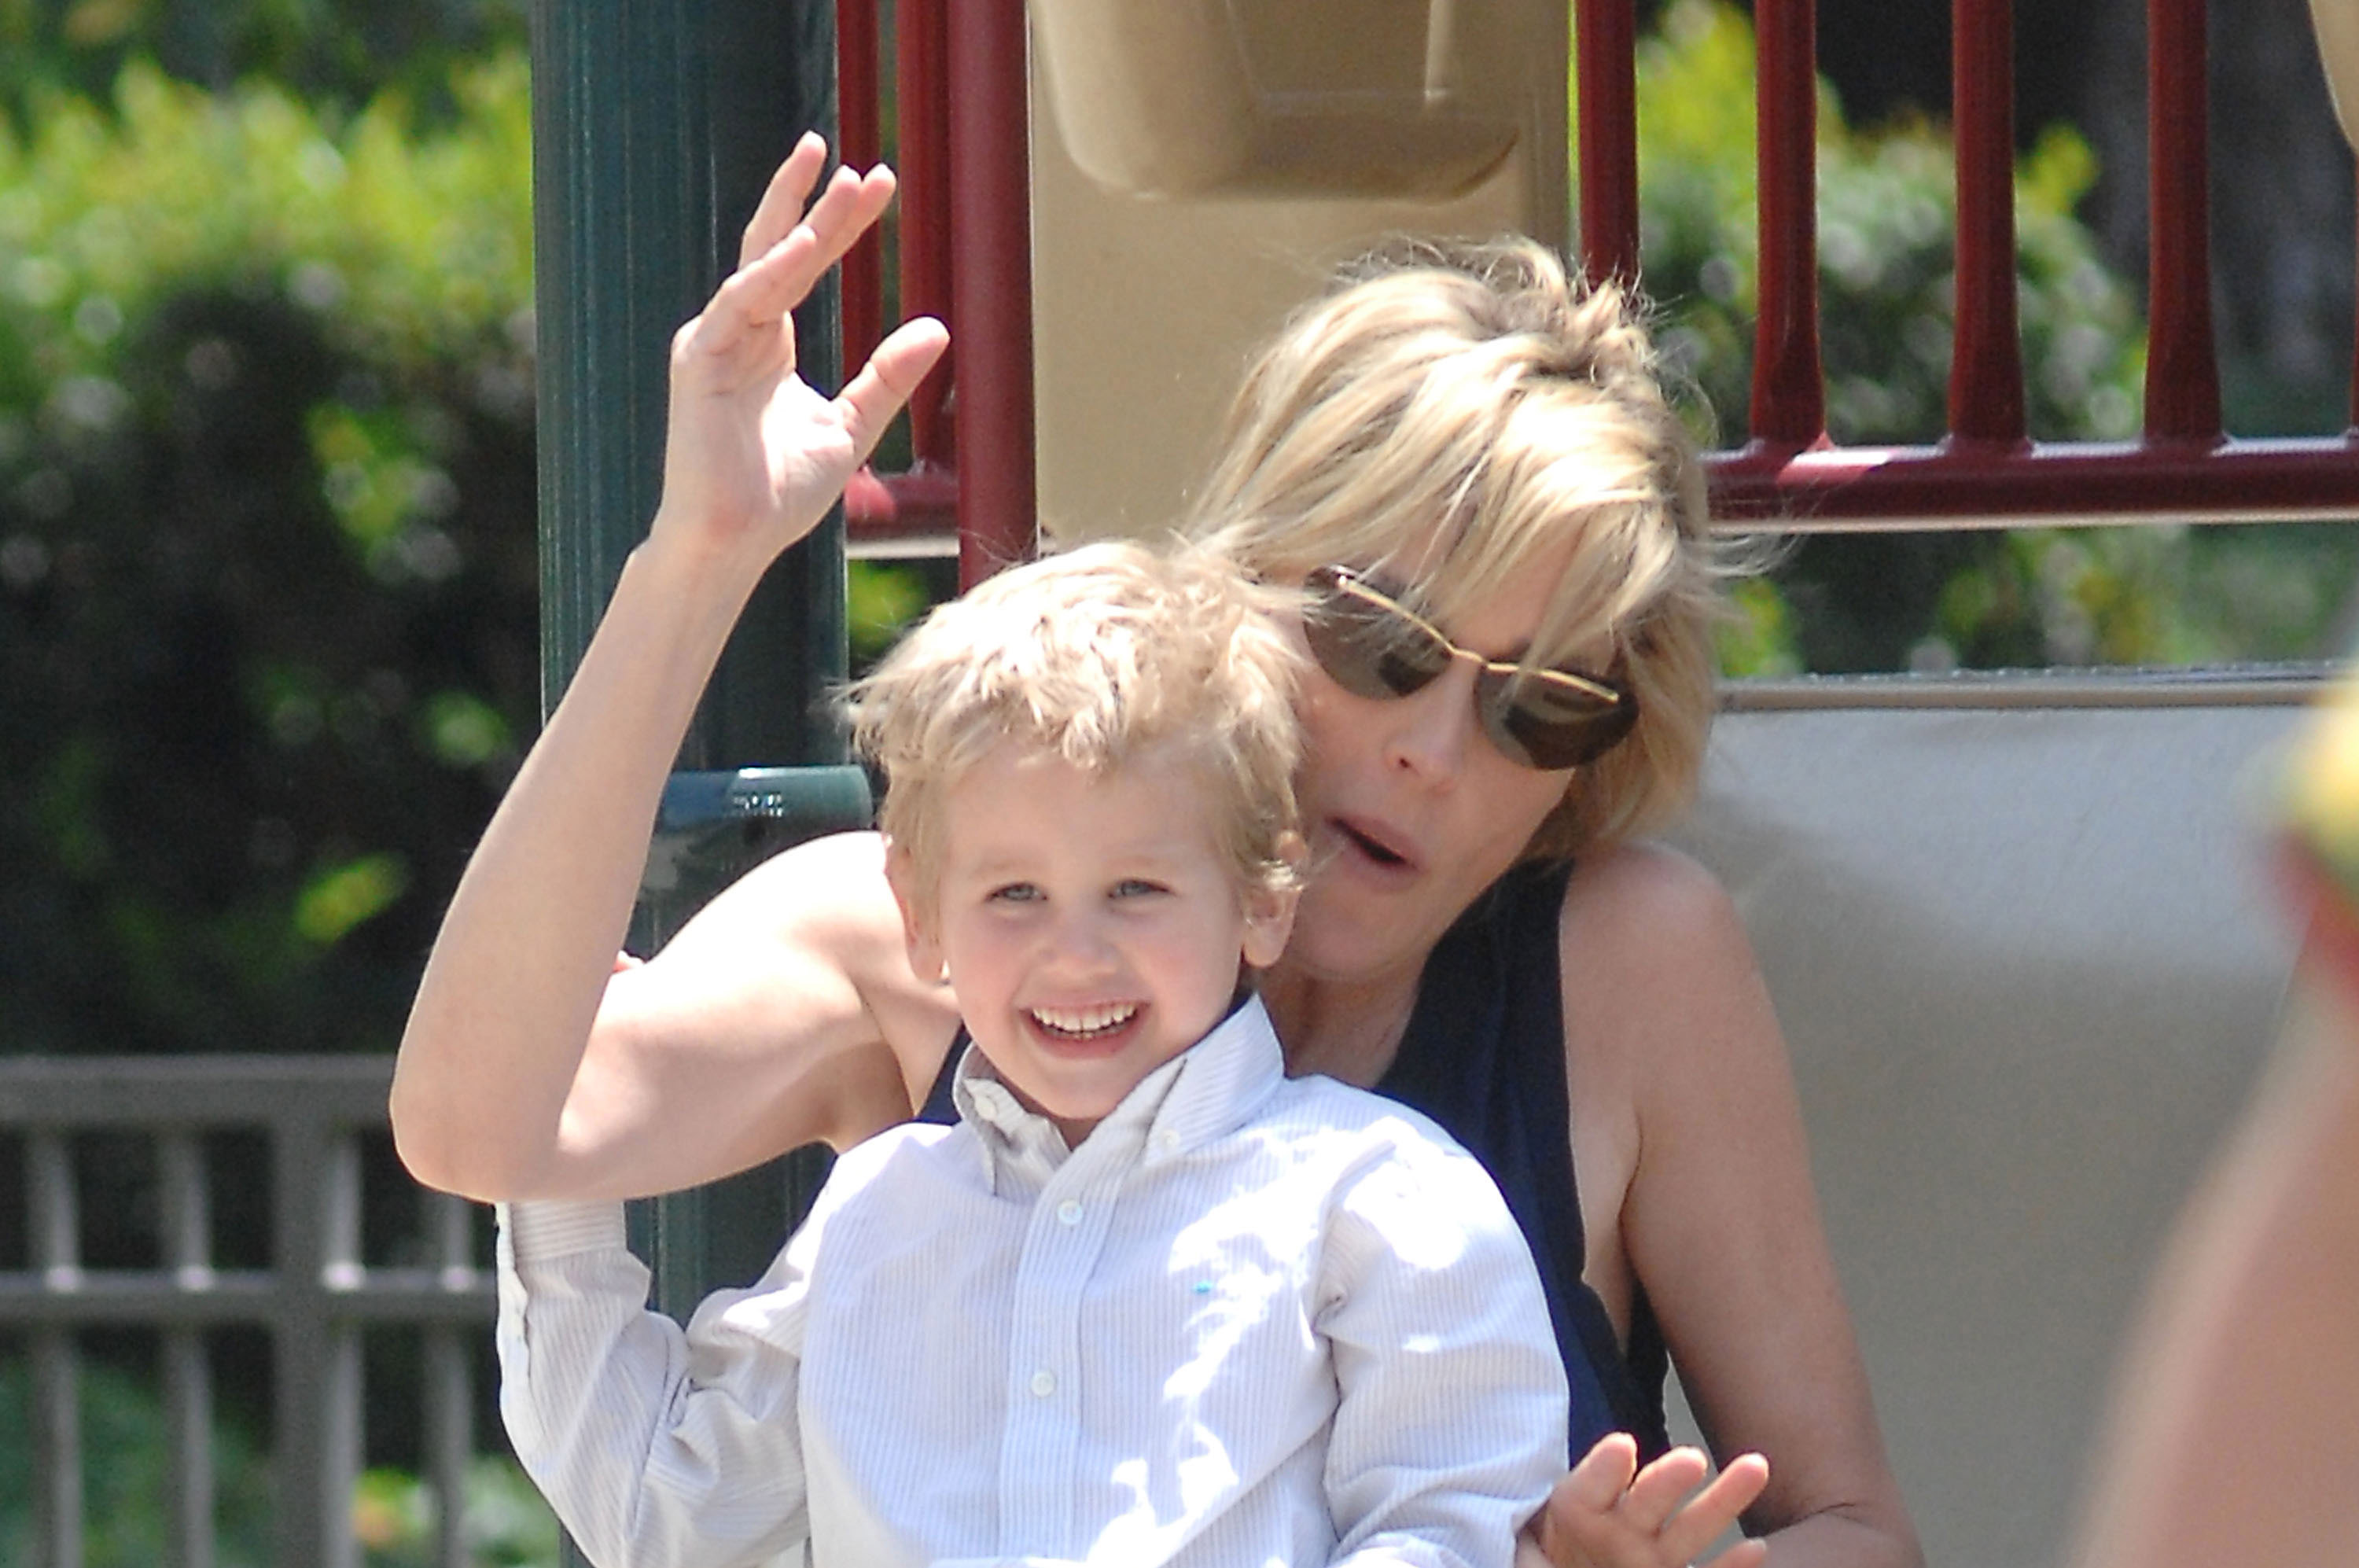 Laird Vonne Stone and Sharon Stone spotted out in Beverly Hills, California on April 29, 2009 | Source: Getty Images